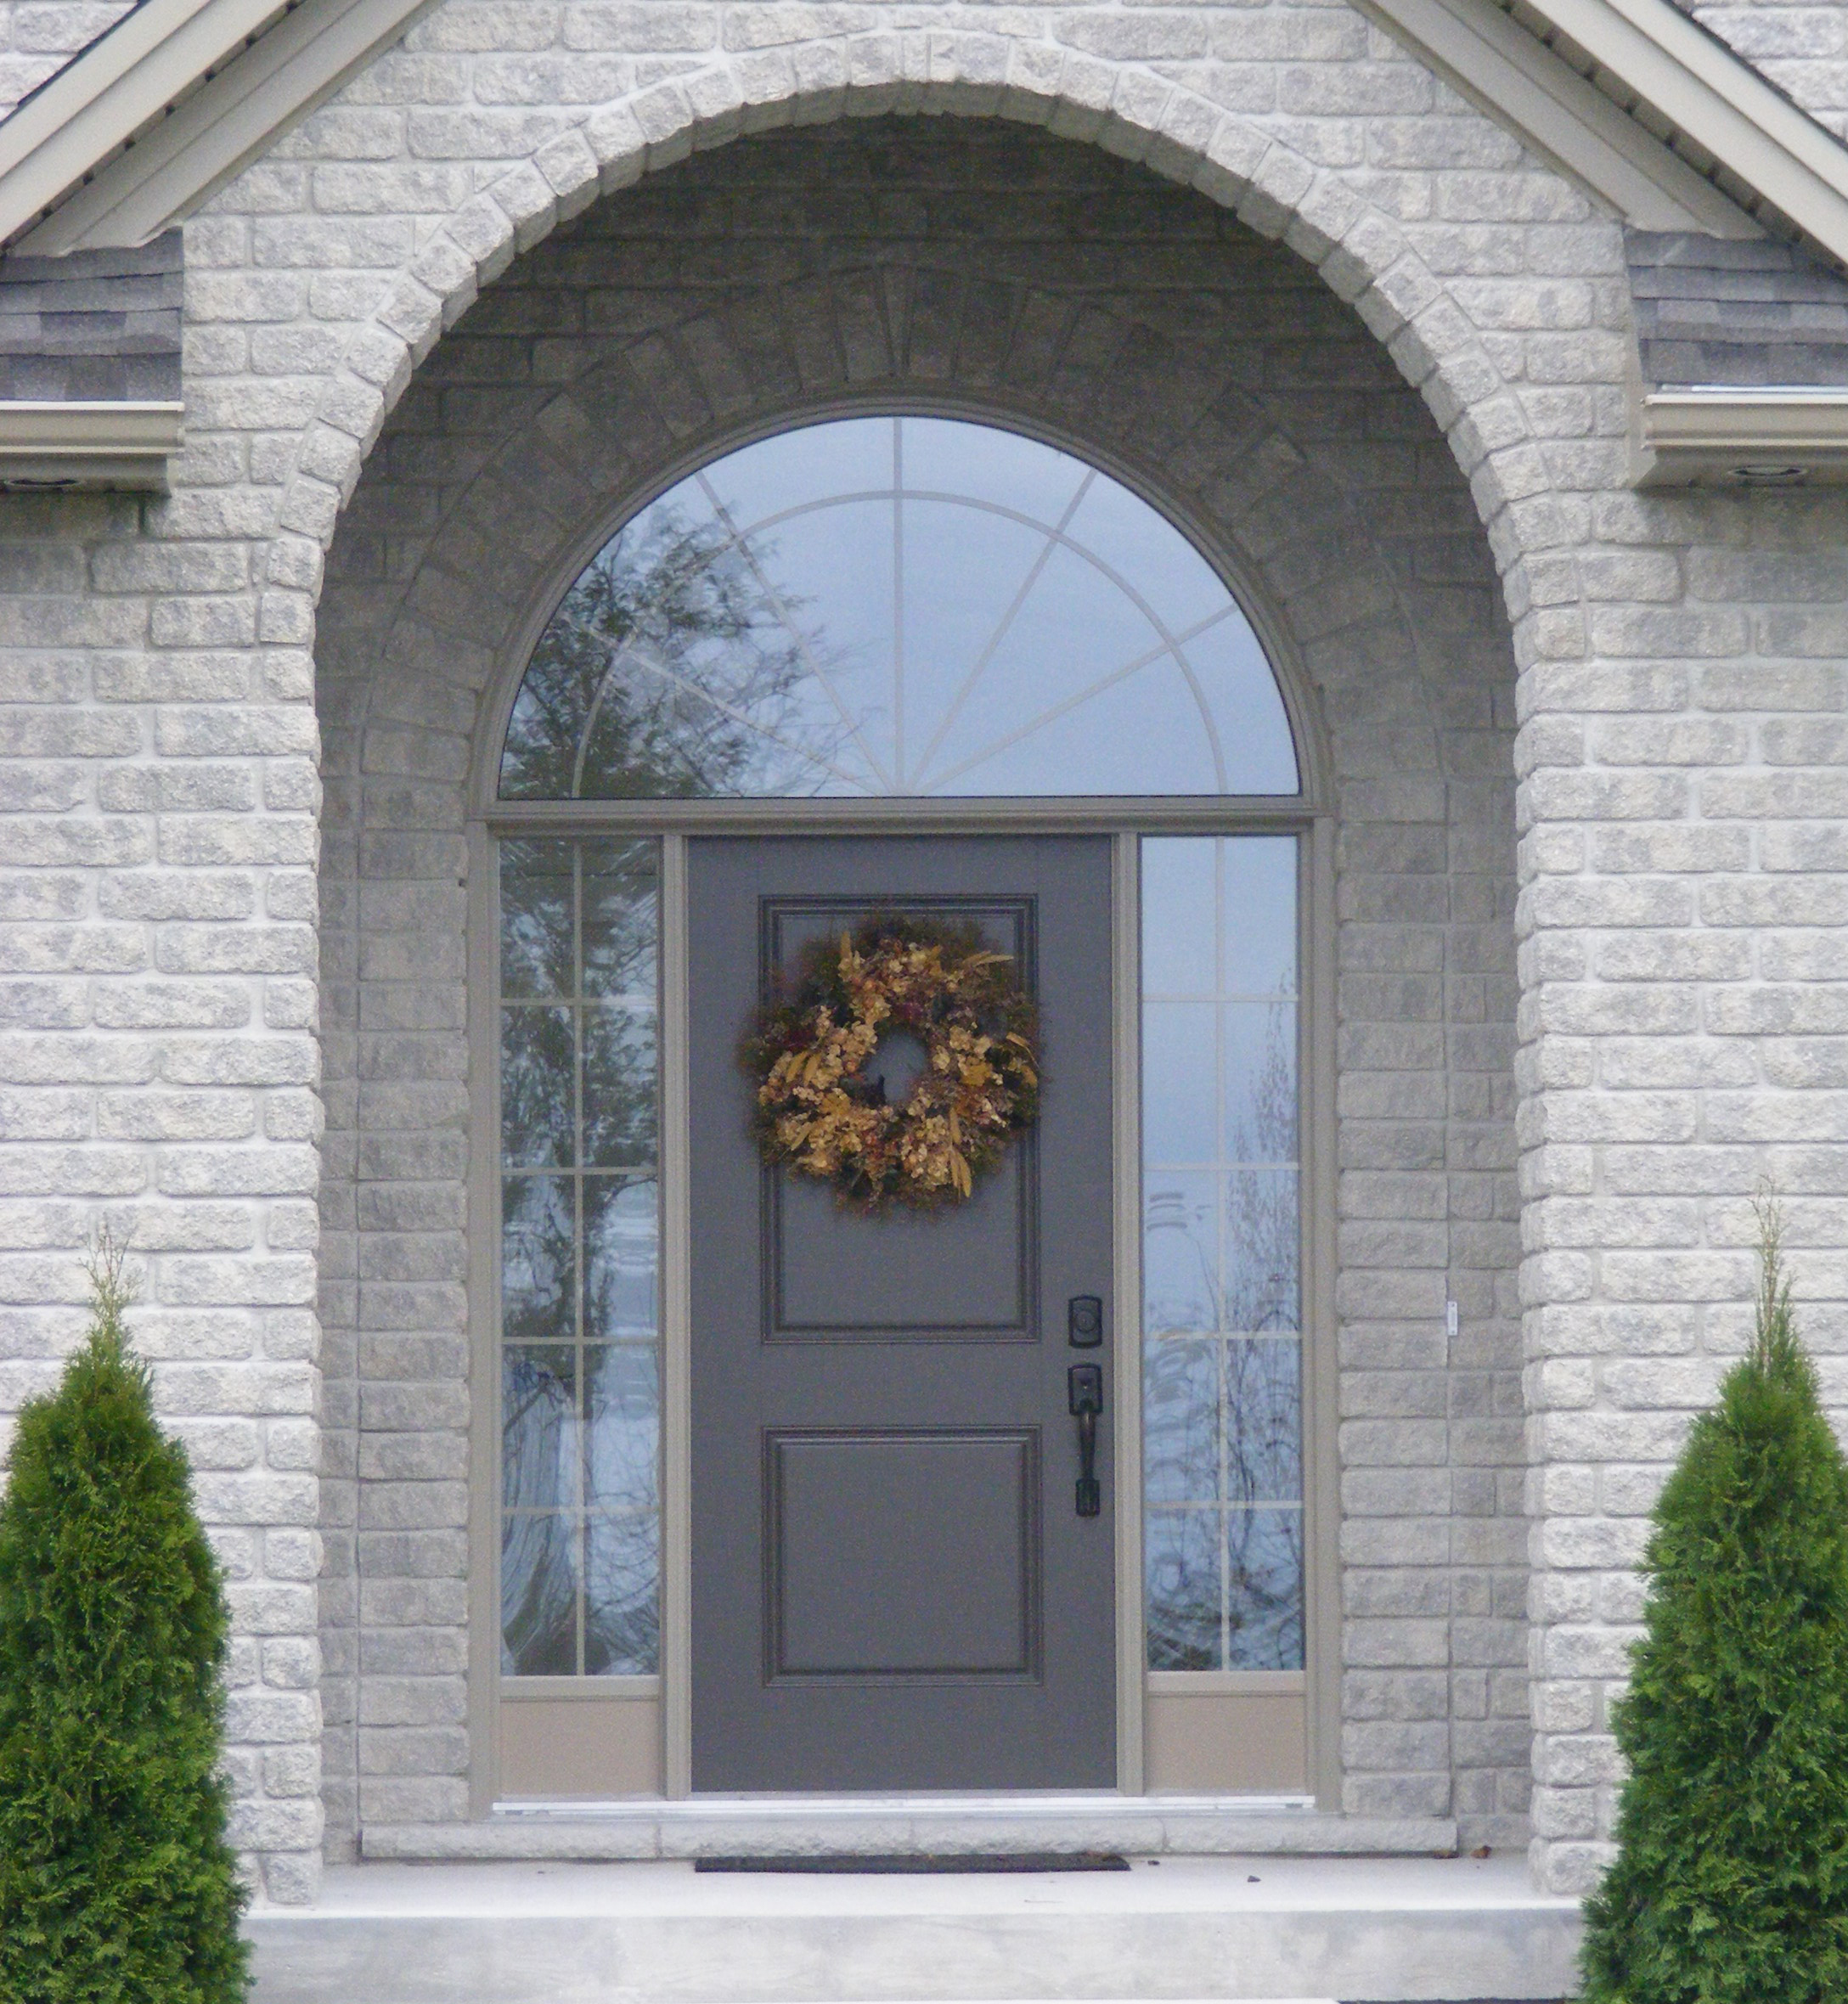 How to Prevent Damage to Your Windows and Doors While Decorating for the Holidays | Golden Windows